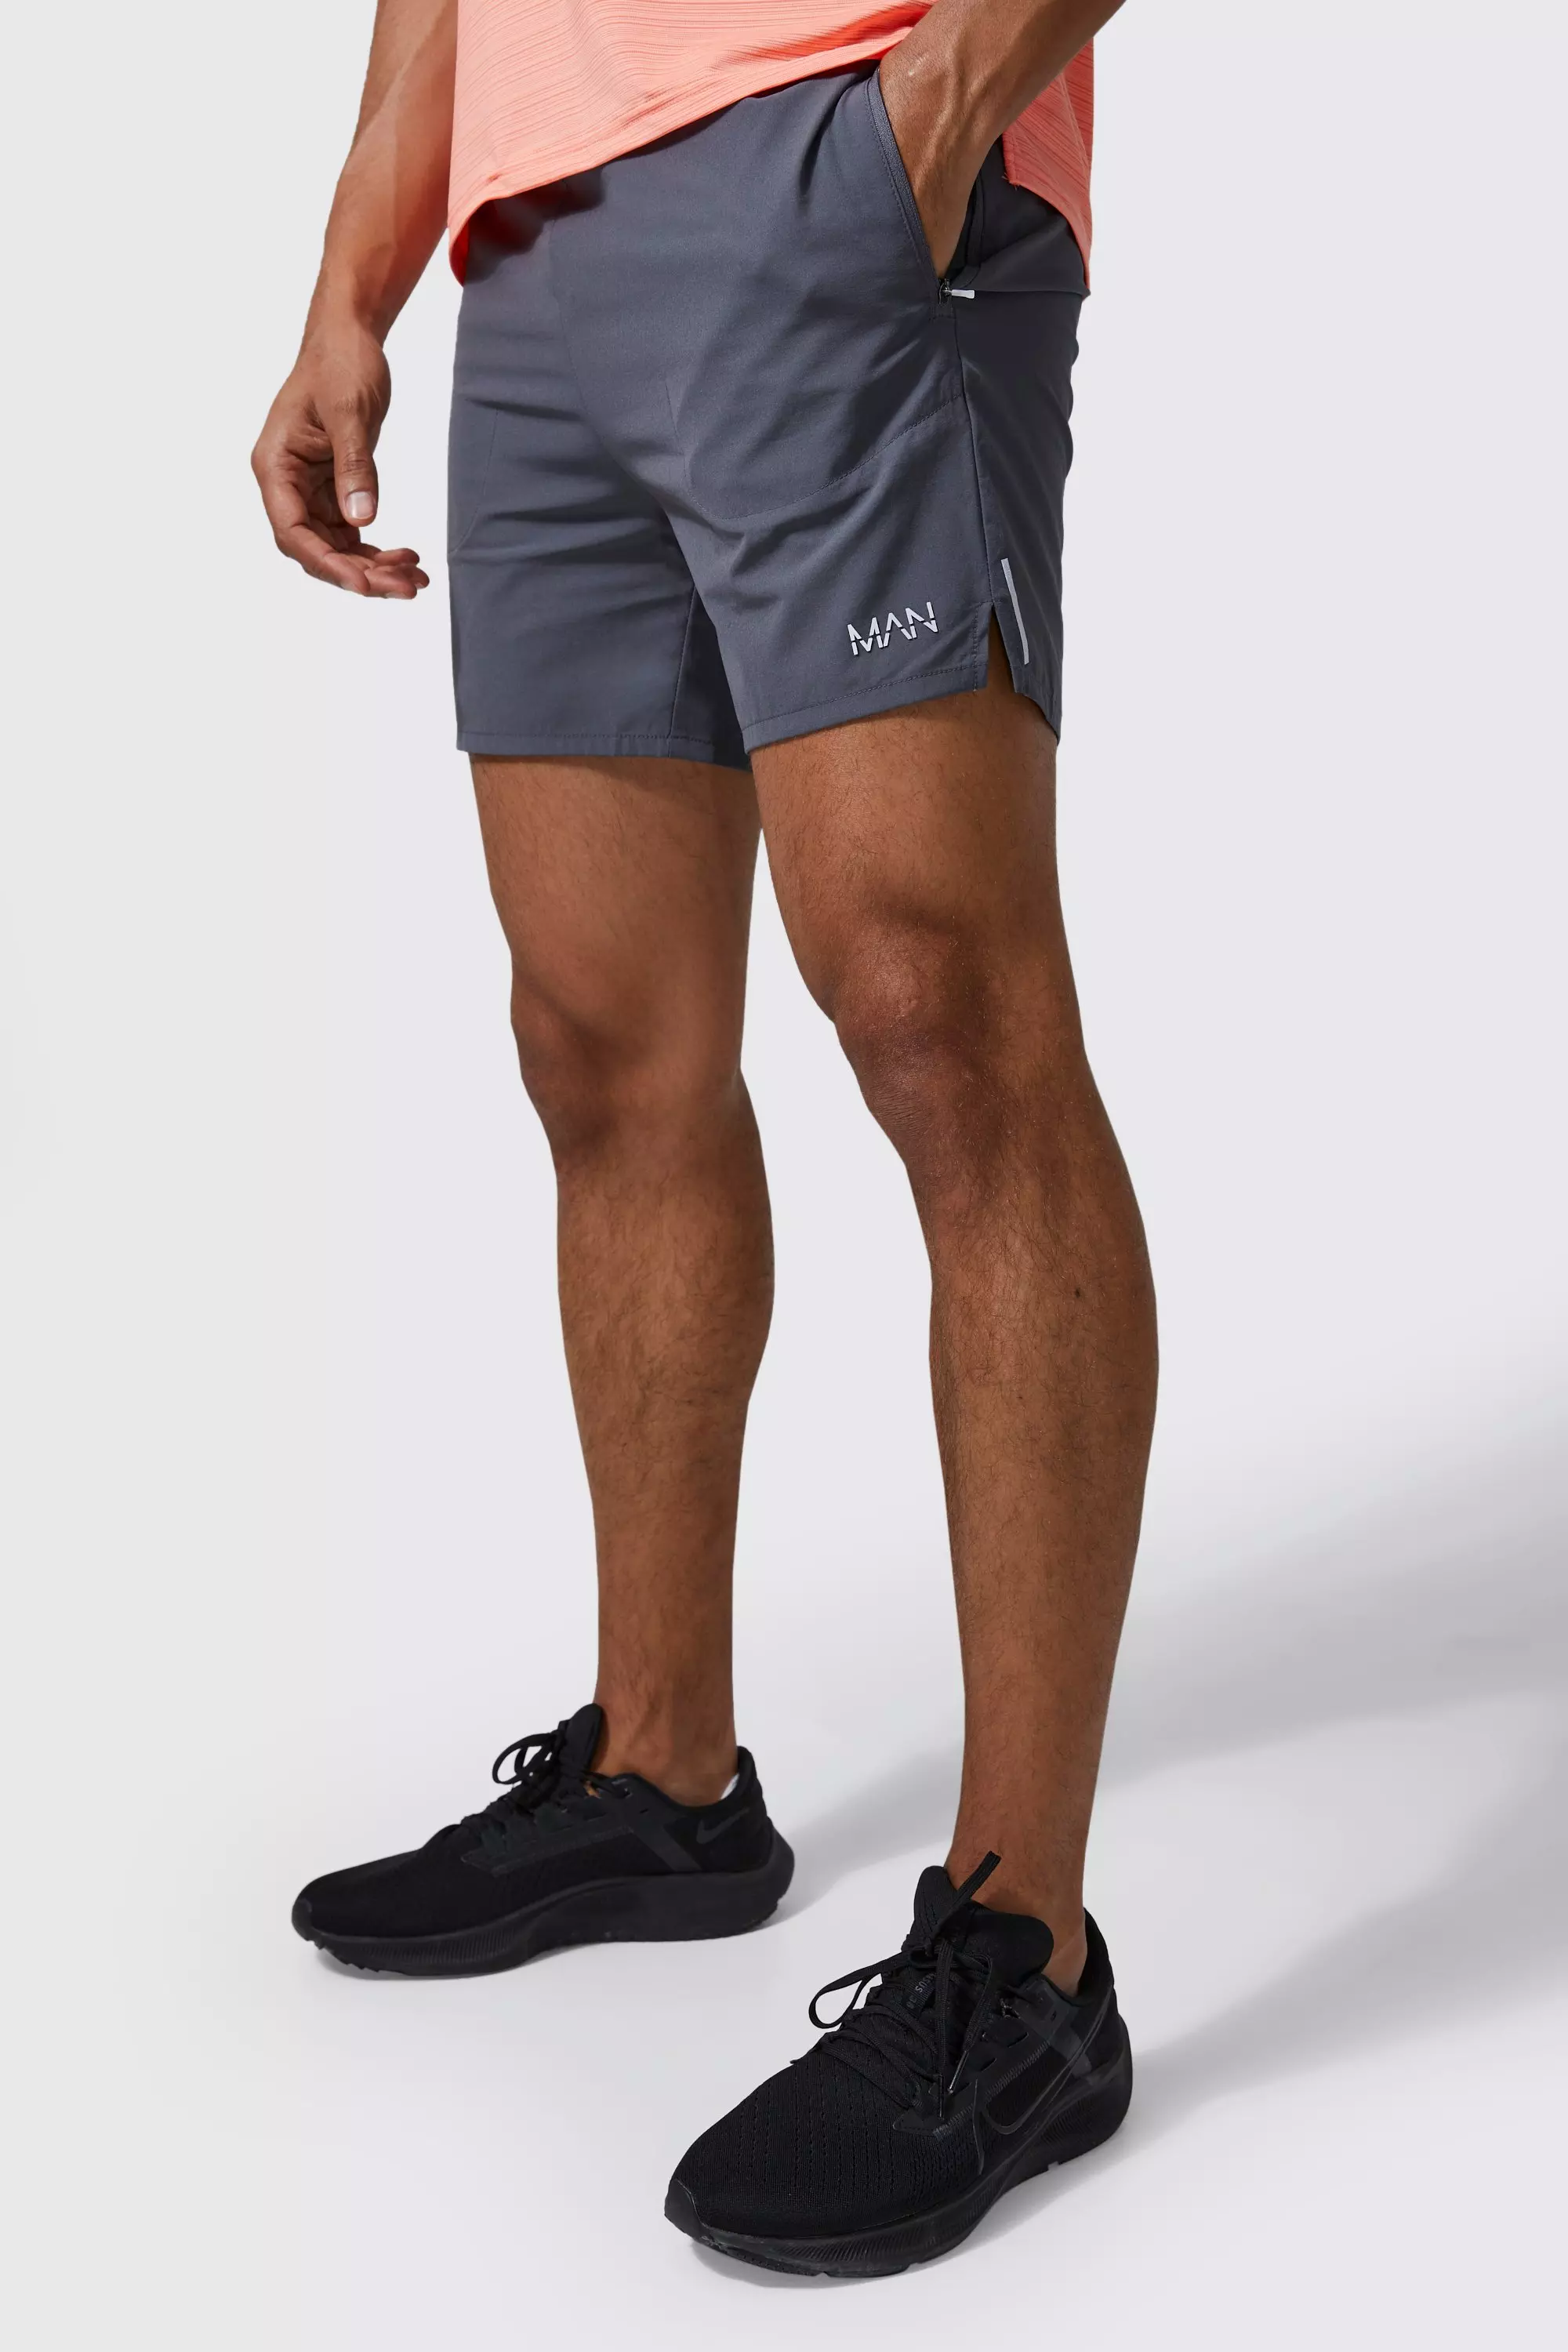 Man Active Lightweight Performance Shorts Charcoal